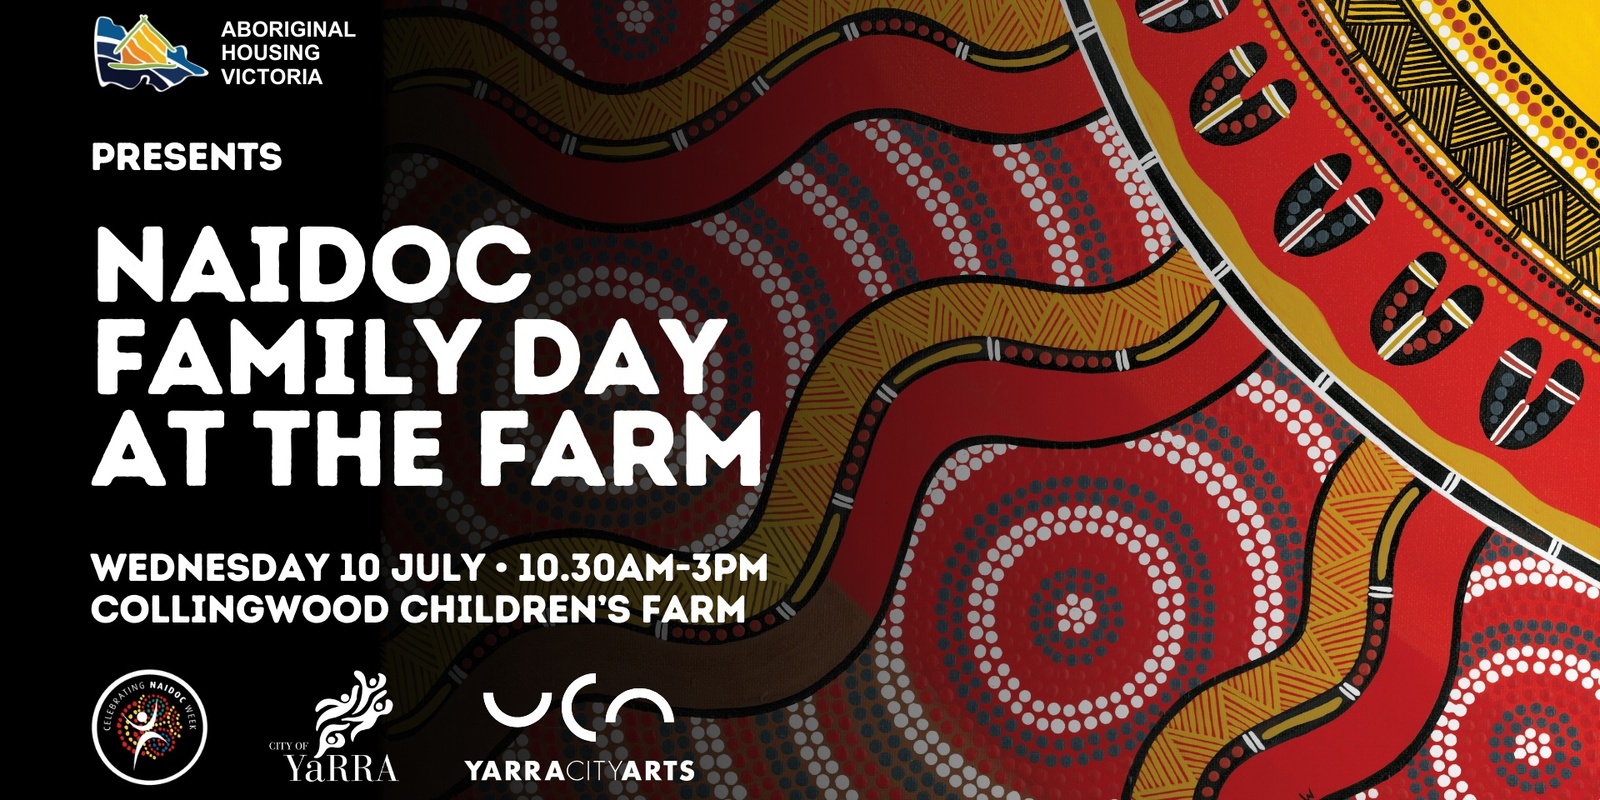 Banner image for Aboriginal Housing Victoria's NAIDOC Family Day at the Farm